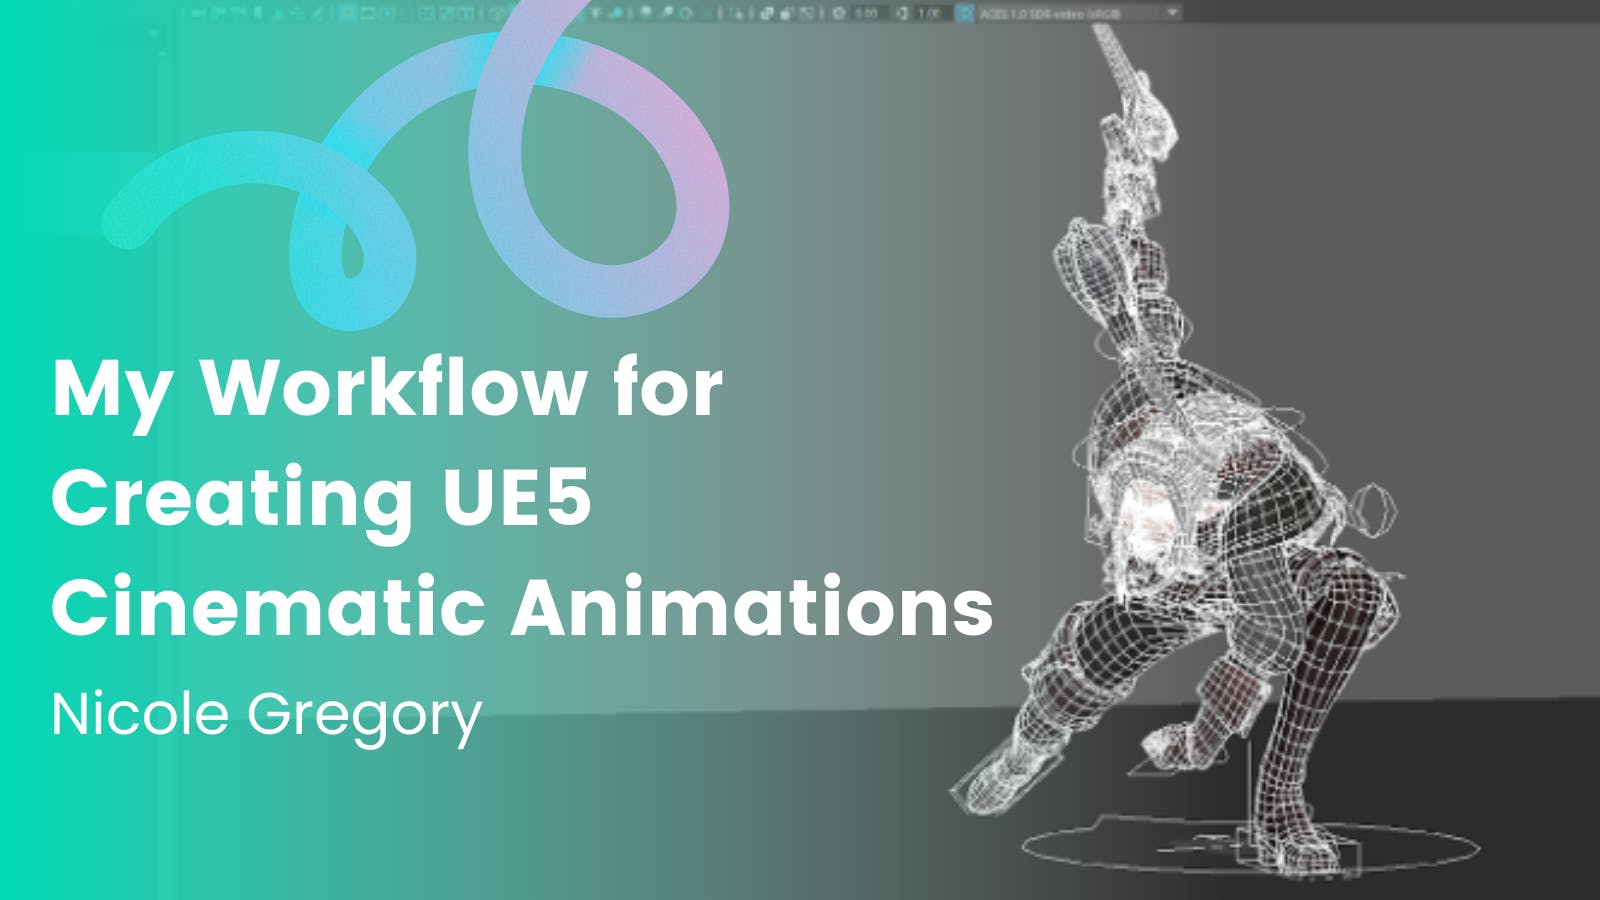 Text: 'My Workflow for Creating UE5 Cinematic Animations - Nicole Gregory. Image: A work in progress still in MAYA